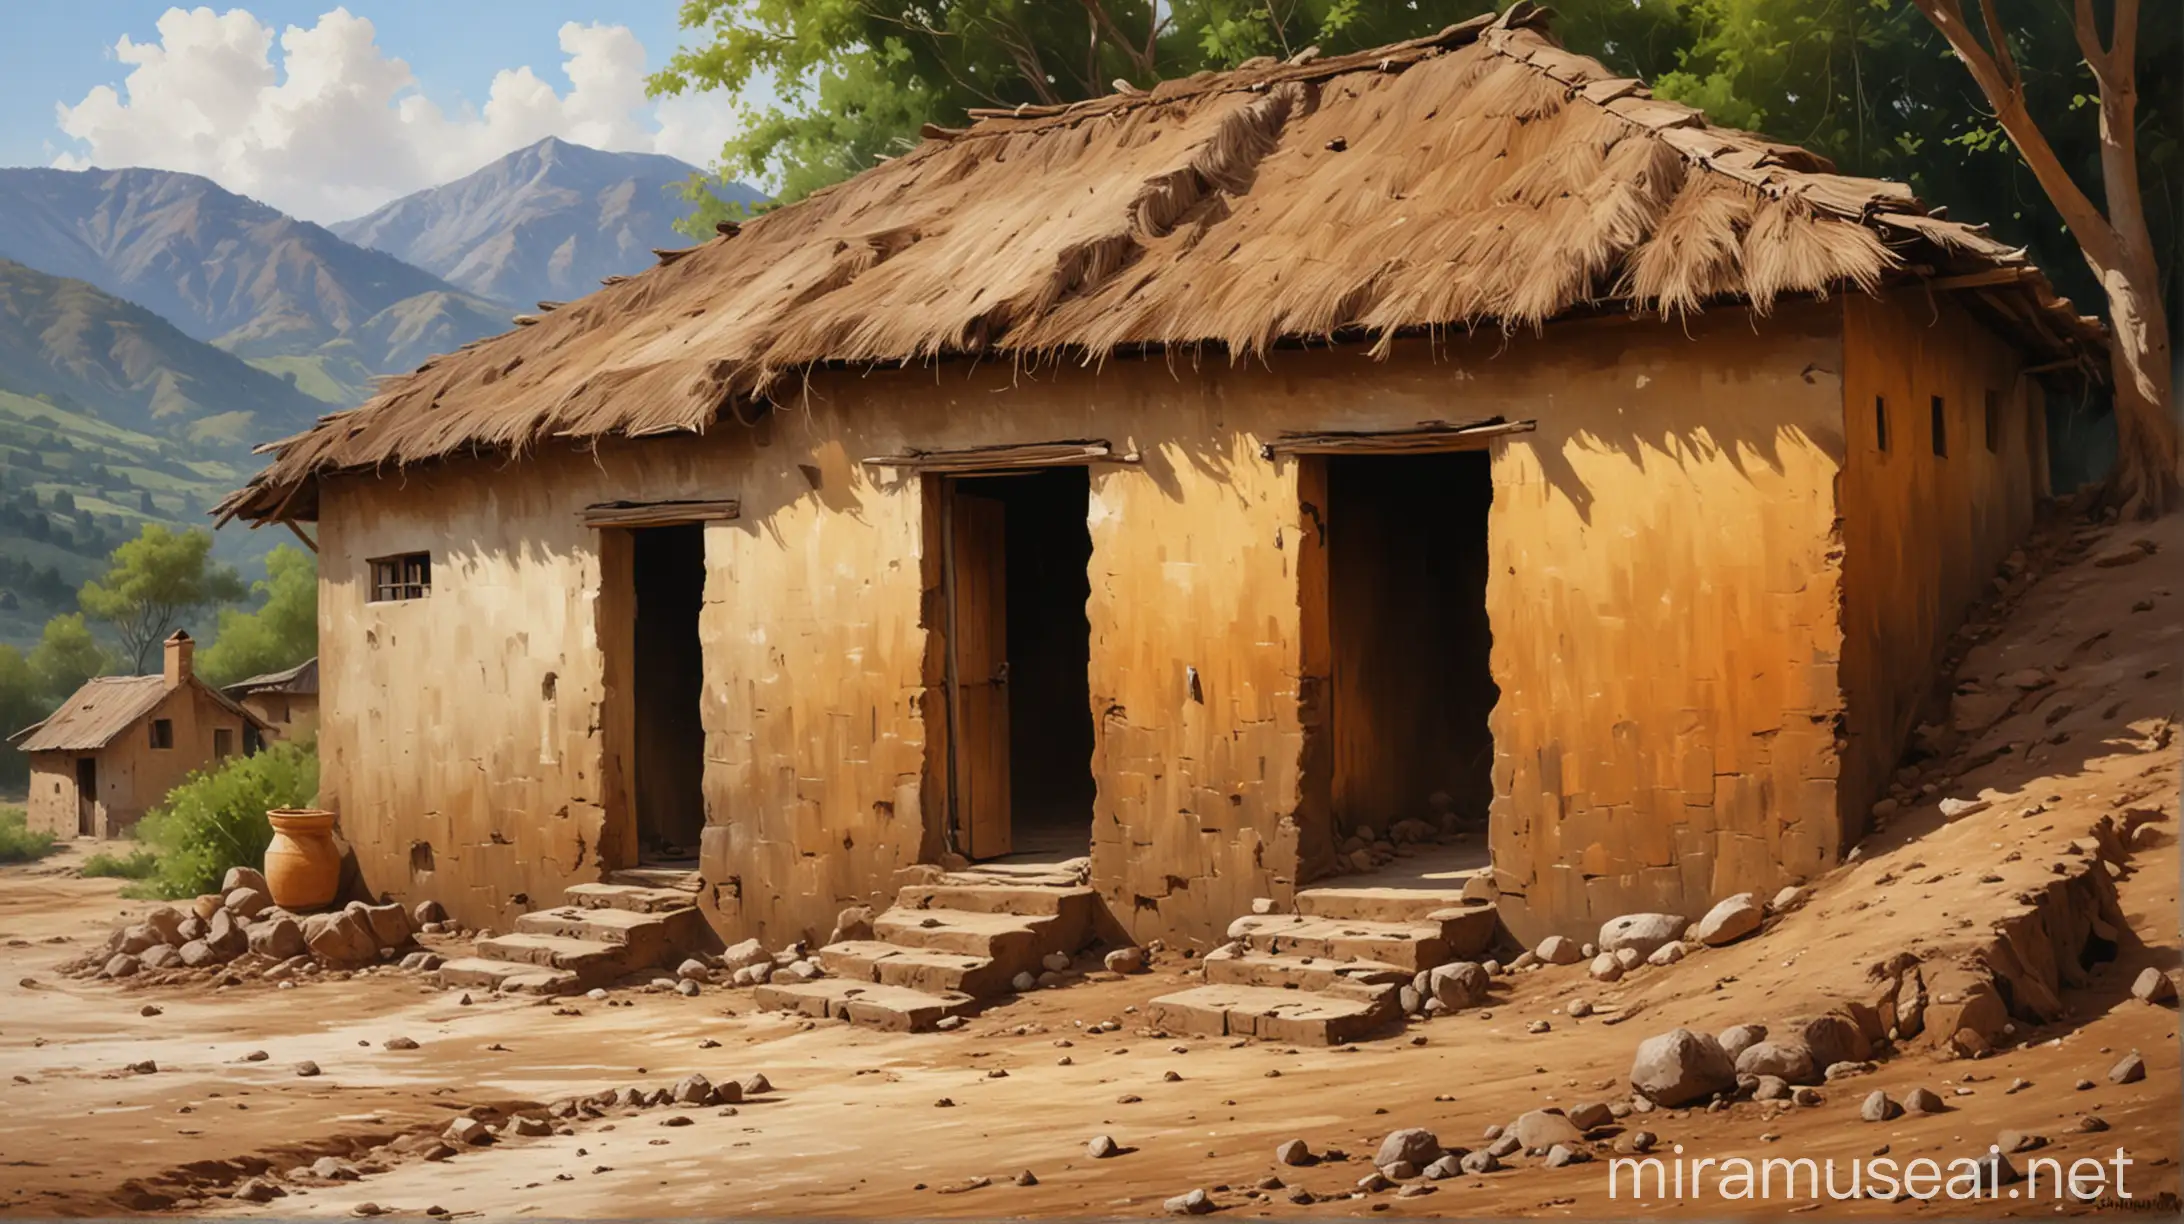 Rural Life Depicted Two Mud Houses in Oil Paint